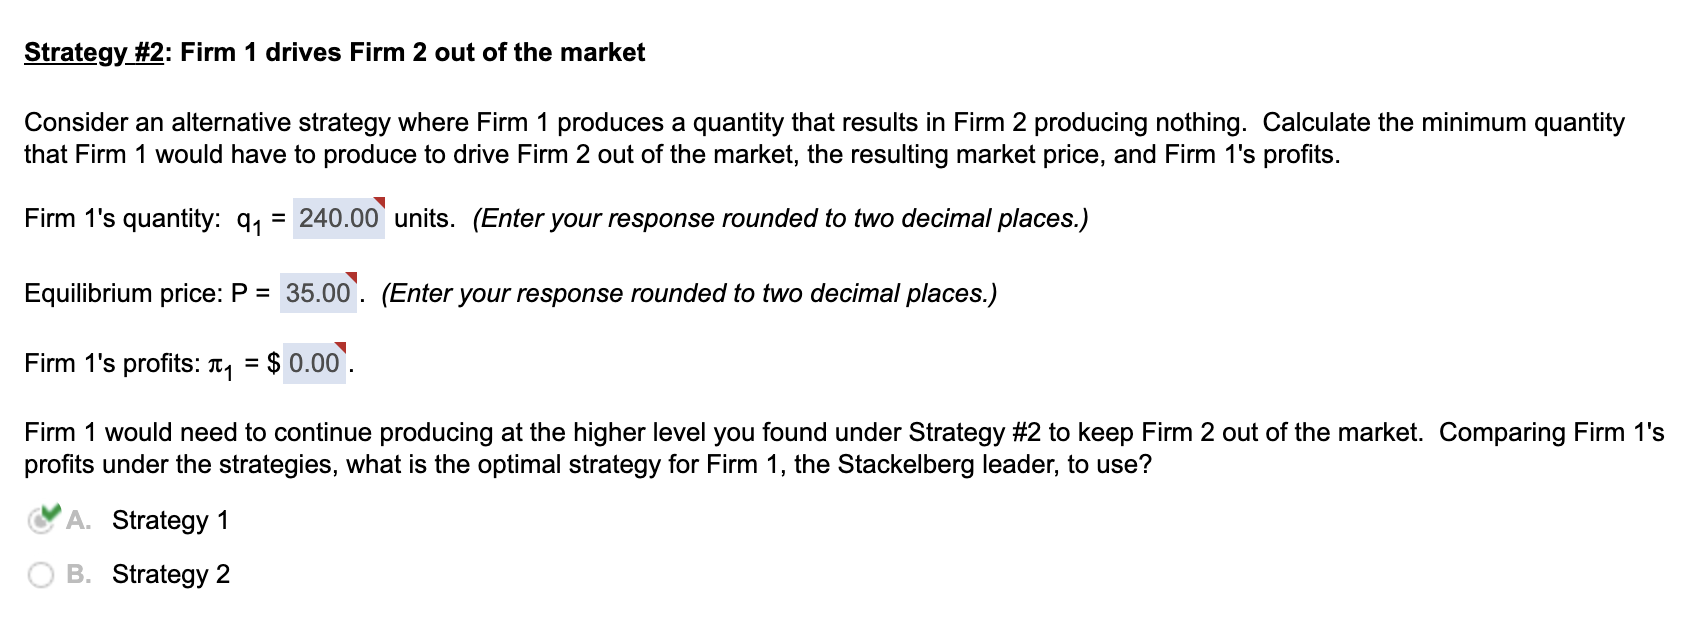 Strategy #2: Firm 1 drives Firm 2 out of the market
Consider an alternative strategy where Firm 1 produces a quantity that results in Firm 2 producing nothing. Calculate the minimum quantity
that Firm 1 would have to produce to drive Firm 2 out of the market, the resulting market price, and Firm 1's profits.
Firm 1's quantity: 9₁
= 240.00 units. (Enter your response rounded to two decimal places.)
Equilibrium price: P = 35.00. (Enter your response rounded to two decimal places.)
Firm 1's profits: ₁ = $0.00.
Firm 1 would need to continue producing at the higher level you found under Strategy #2 to keep Firm 2 out of the market. Comparing Firm 1's
profits under the strategies, what is the optimal strategy for Firm 1, the Stackelberg leader, to use?
A. Strategy 1
B. Strategy 2